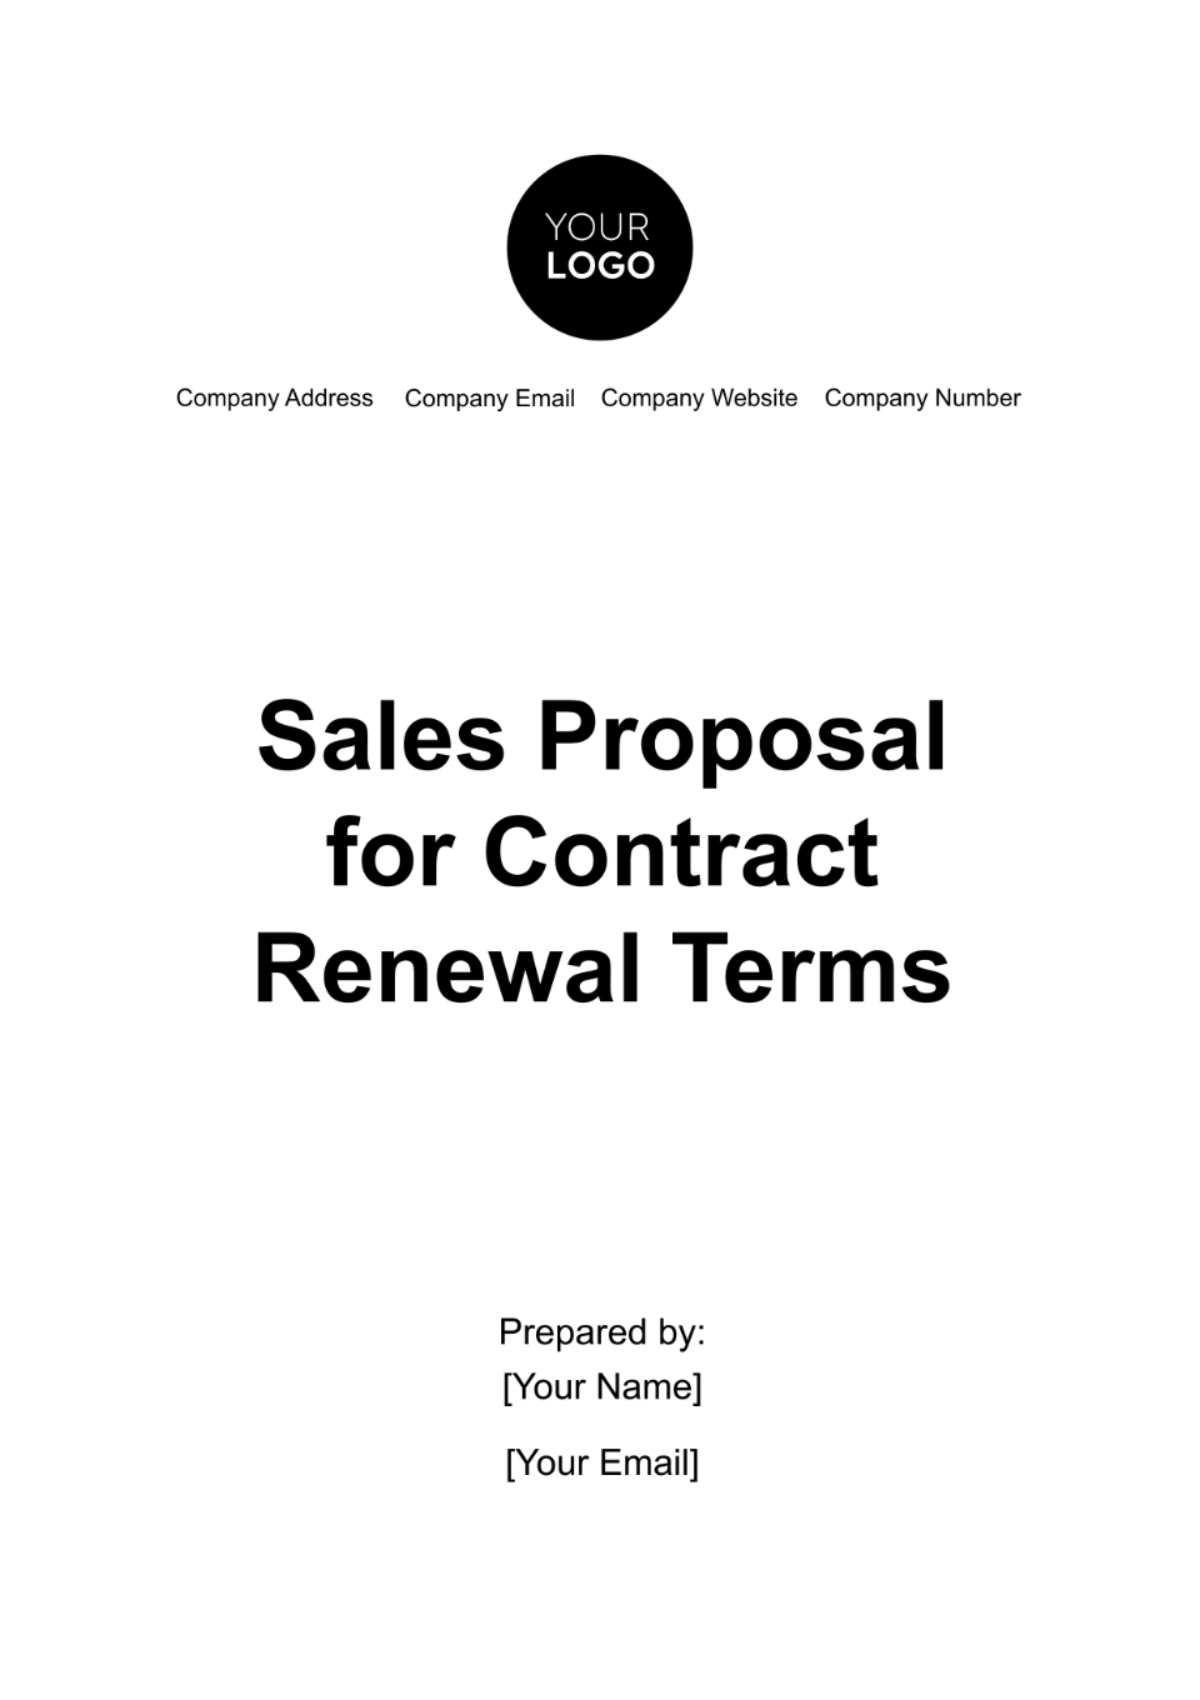 Sales Proposal for Contract Renewal Terms Template